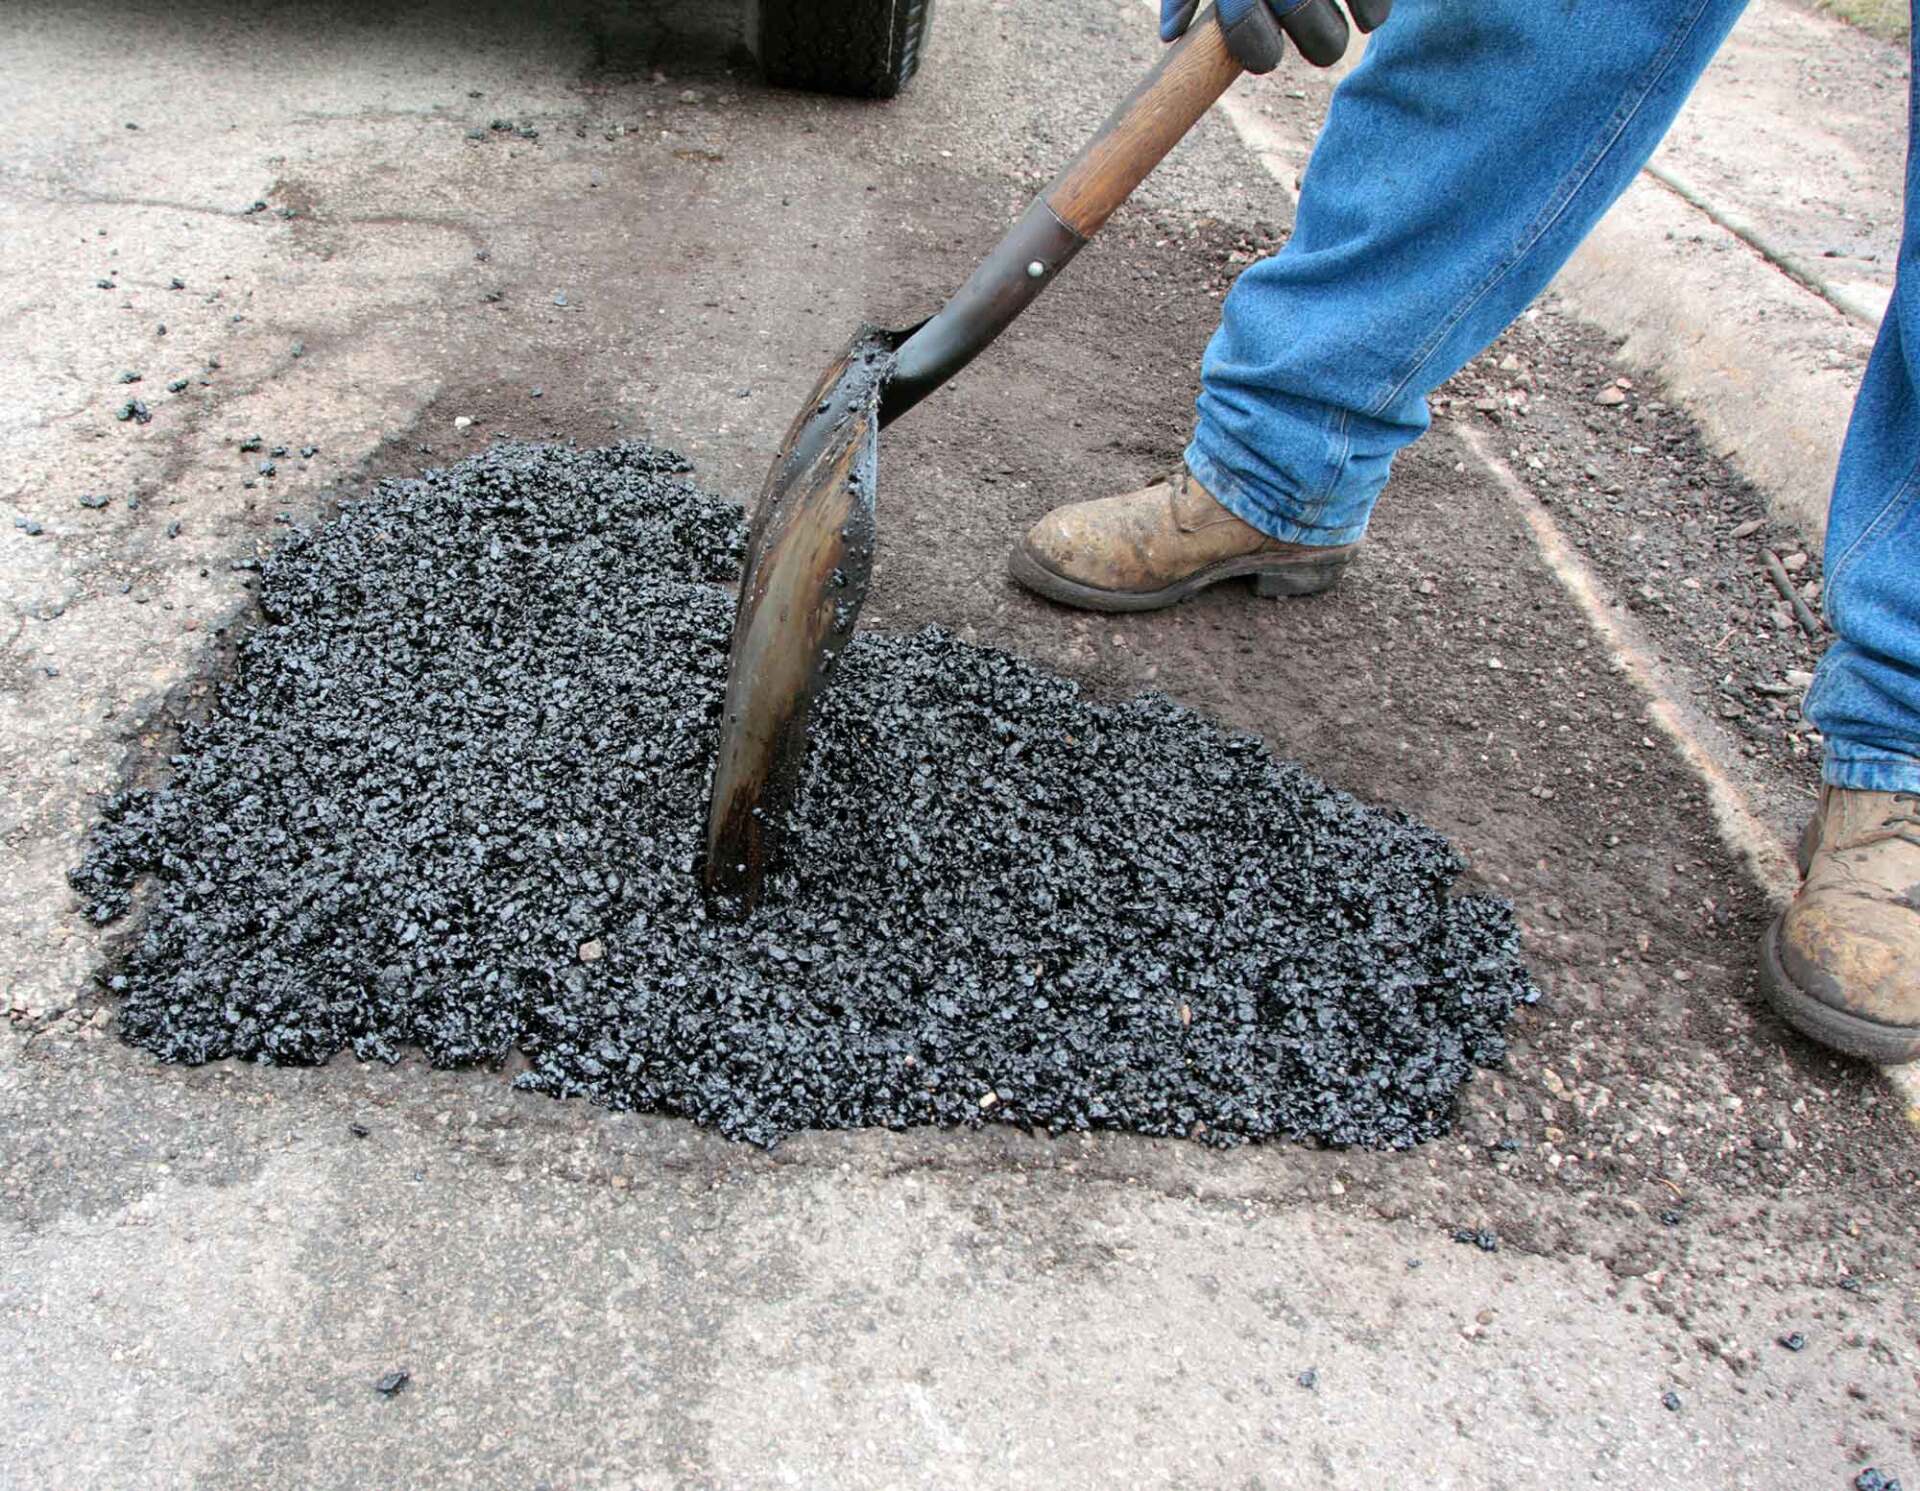 Pothole Repair Services in Ohio, Western Pennsylvania and surrounding areas